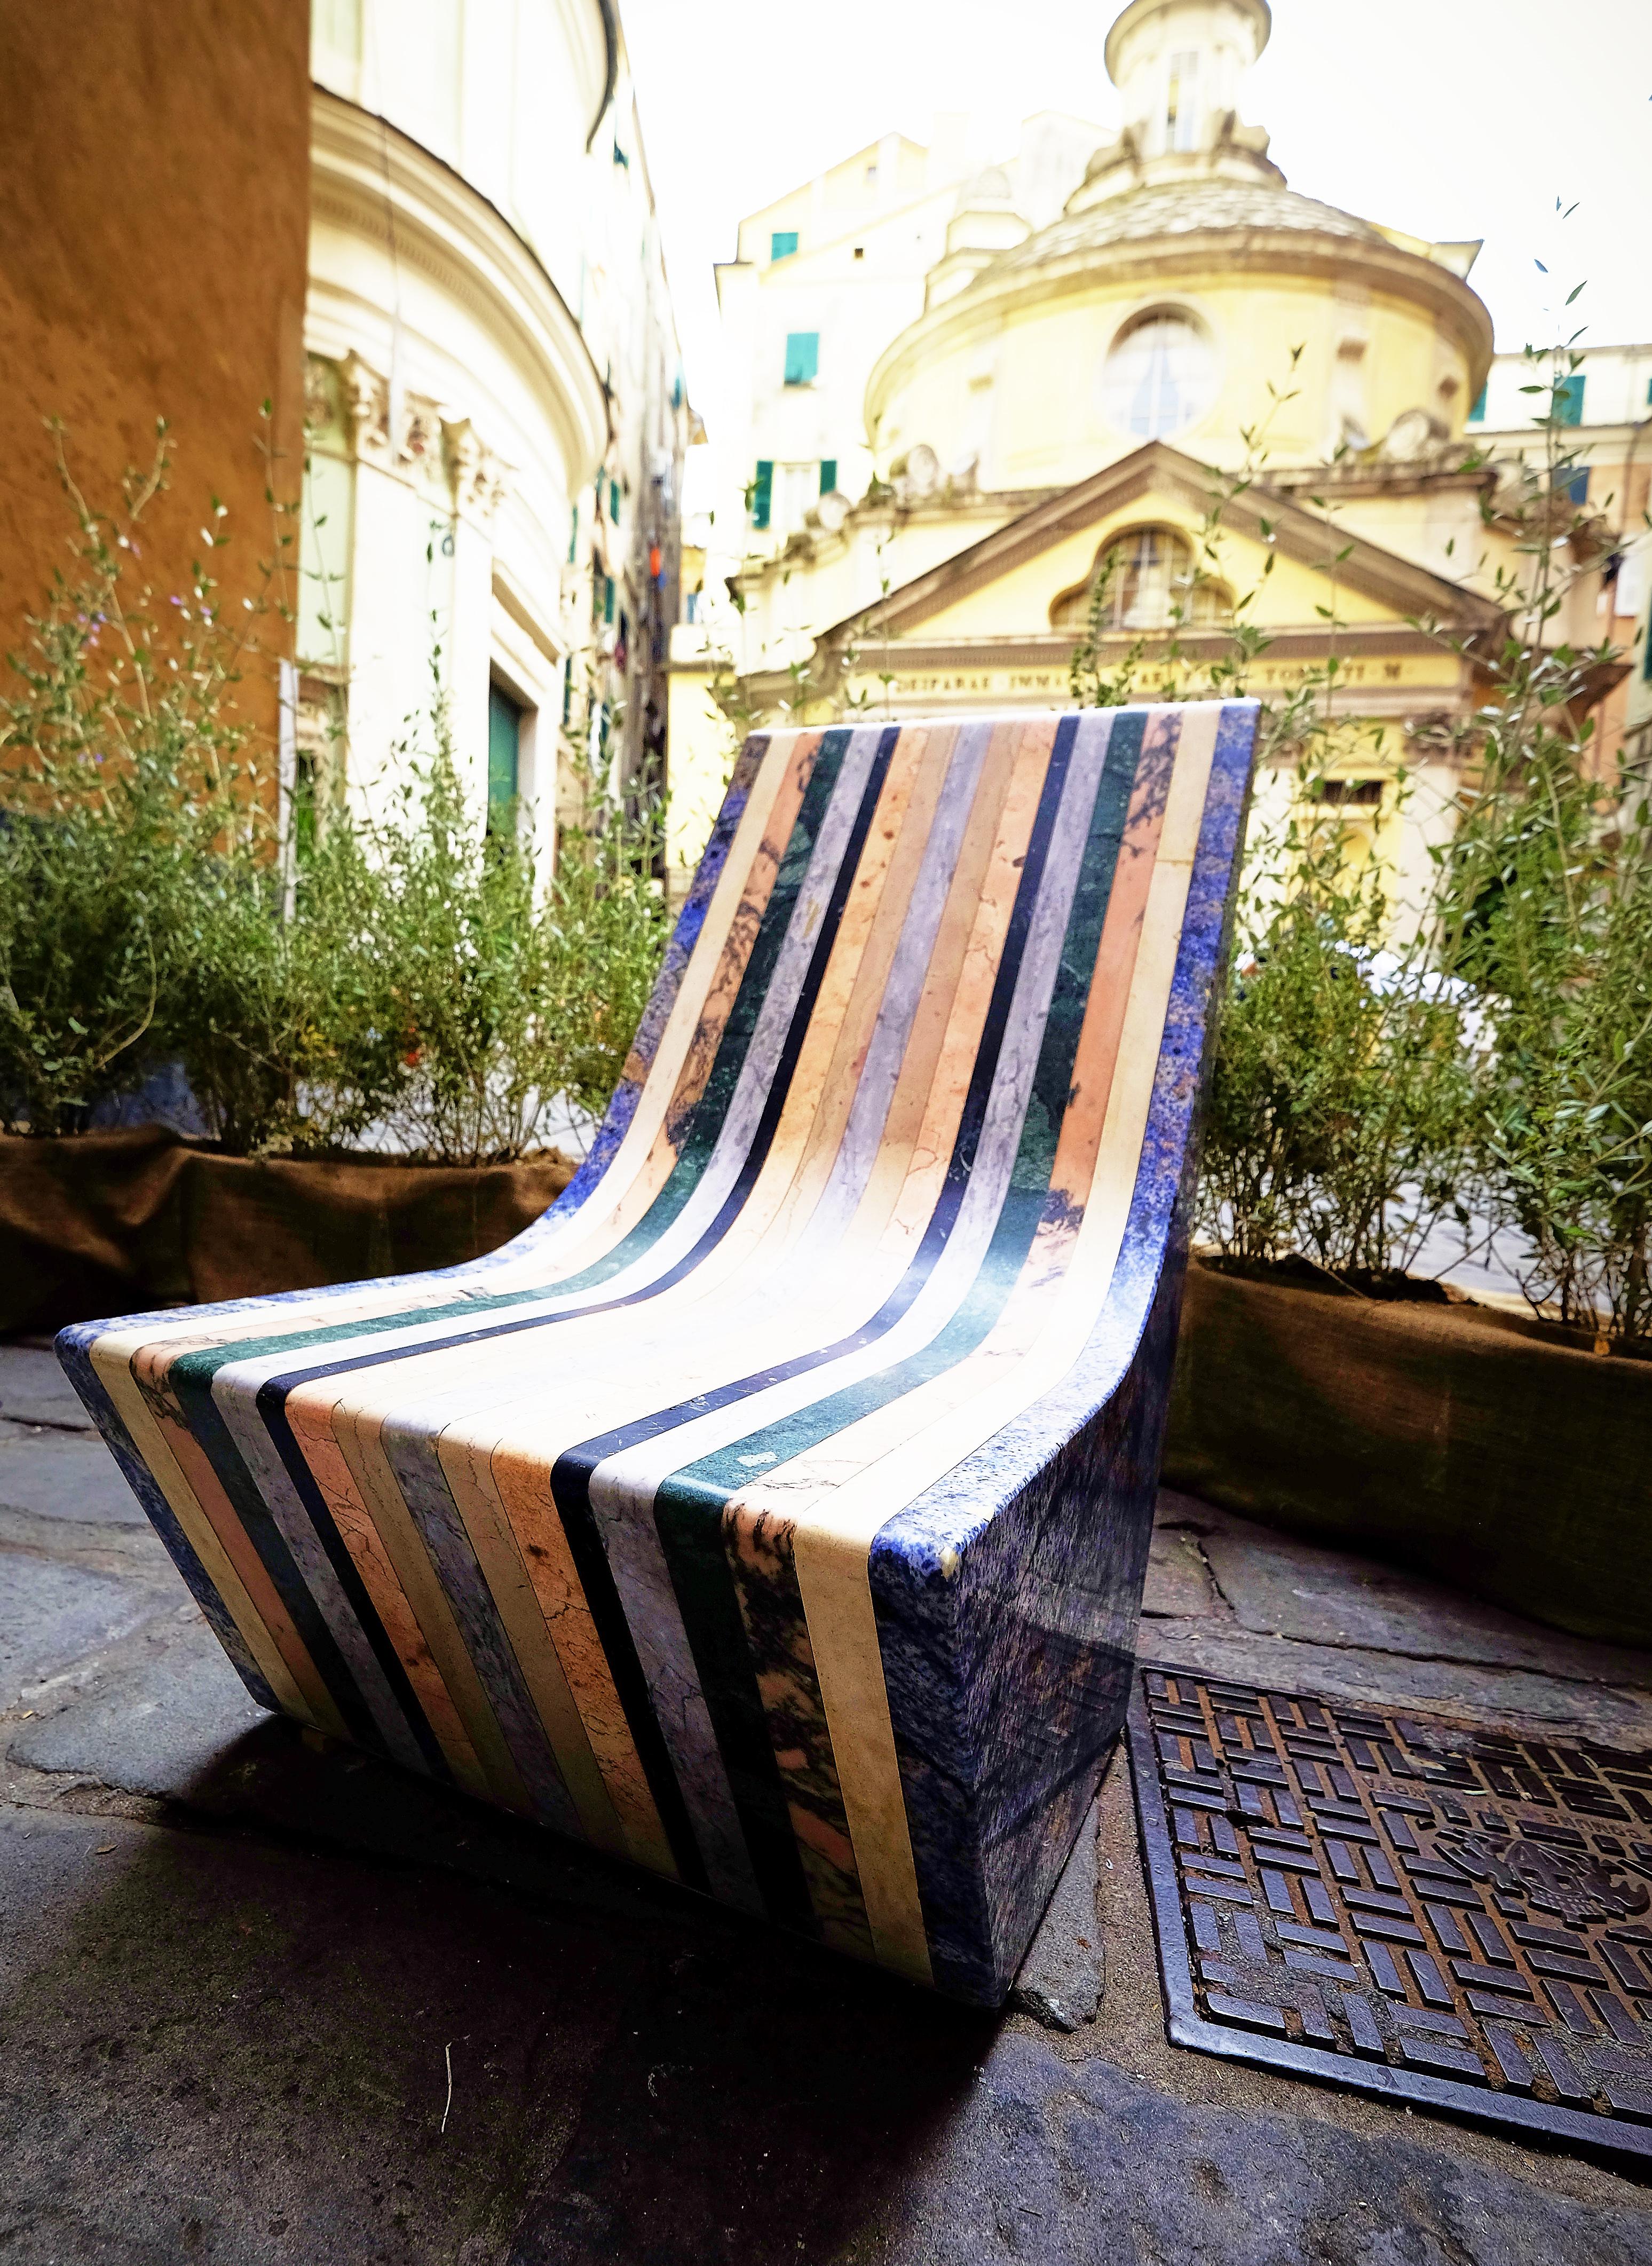 21st Century by M.Nocchi e A.Tazzini Recycled Polichrome Marble Bench Matrioska For Sale 2